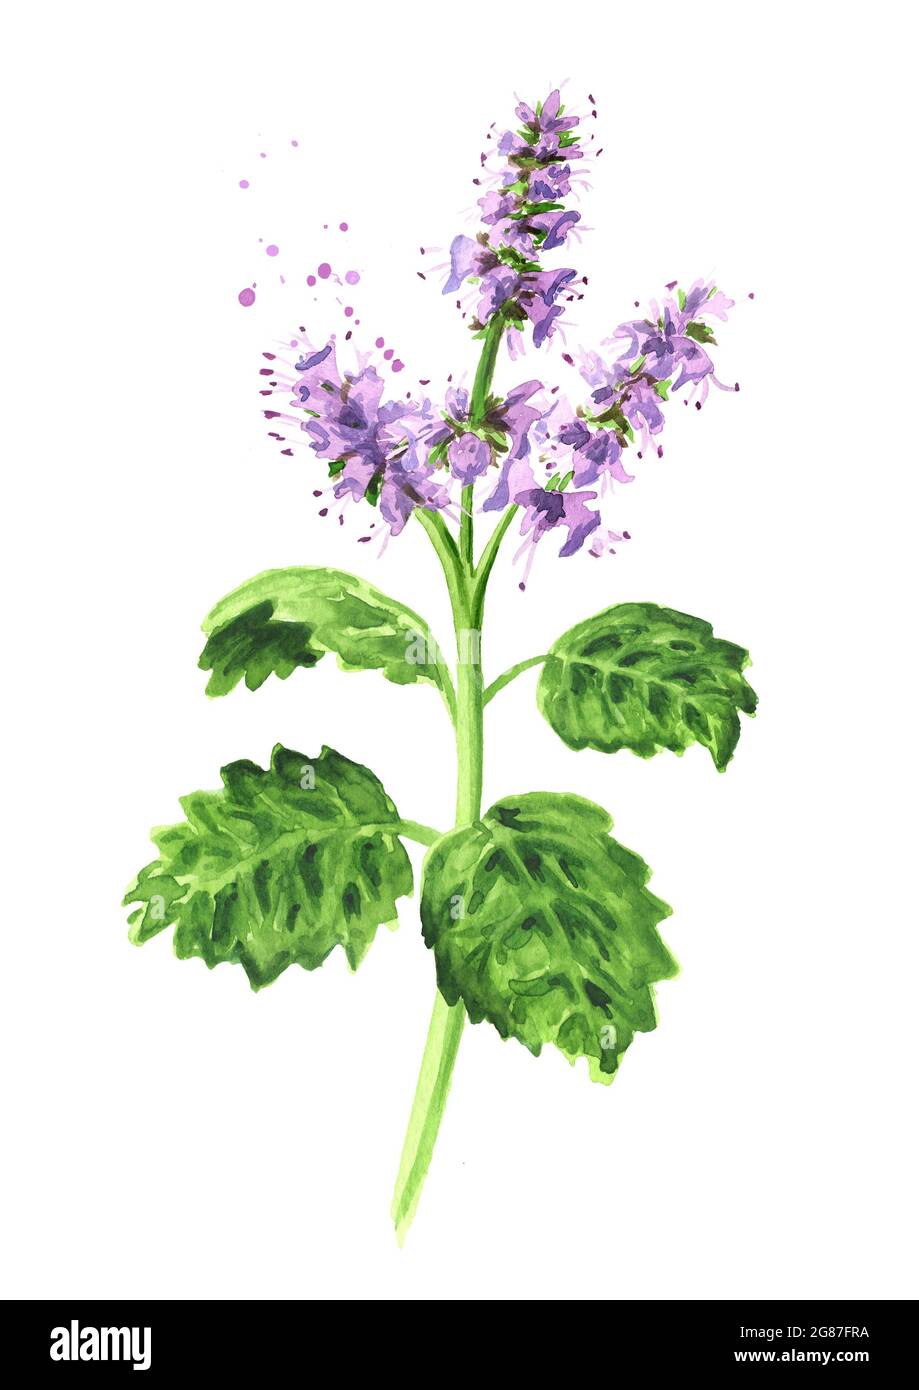 Plant patchouli or Pogostemon cablini branch with flowers and leaves. Hand drawn watercolor illustration isolated on white background Stock Photo